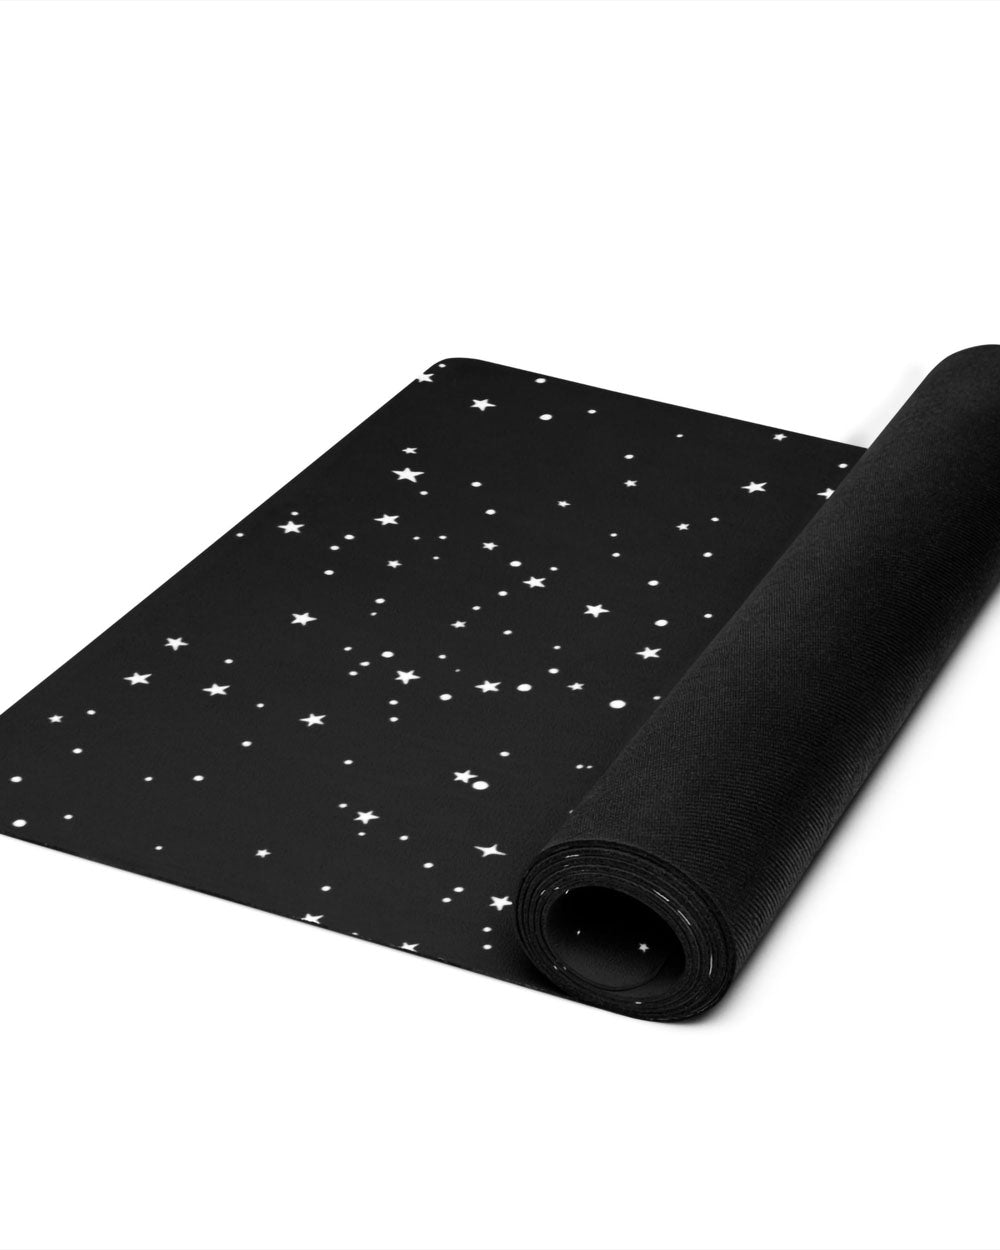 Exercise Mat for Fitness, Yoga, Pilates, Stretching & Floor